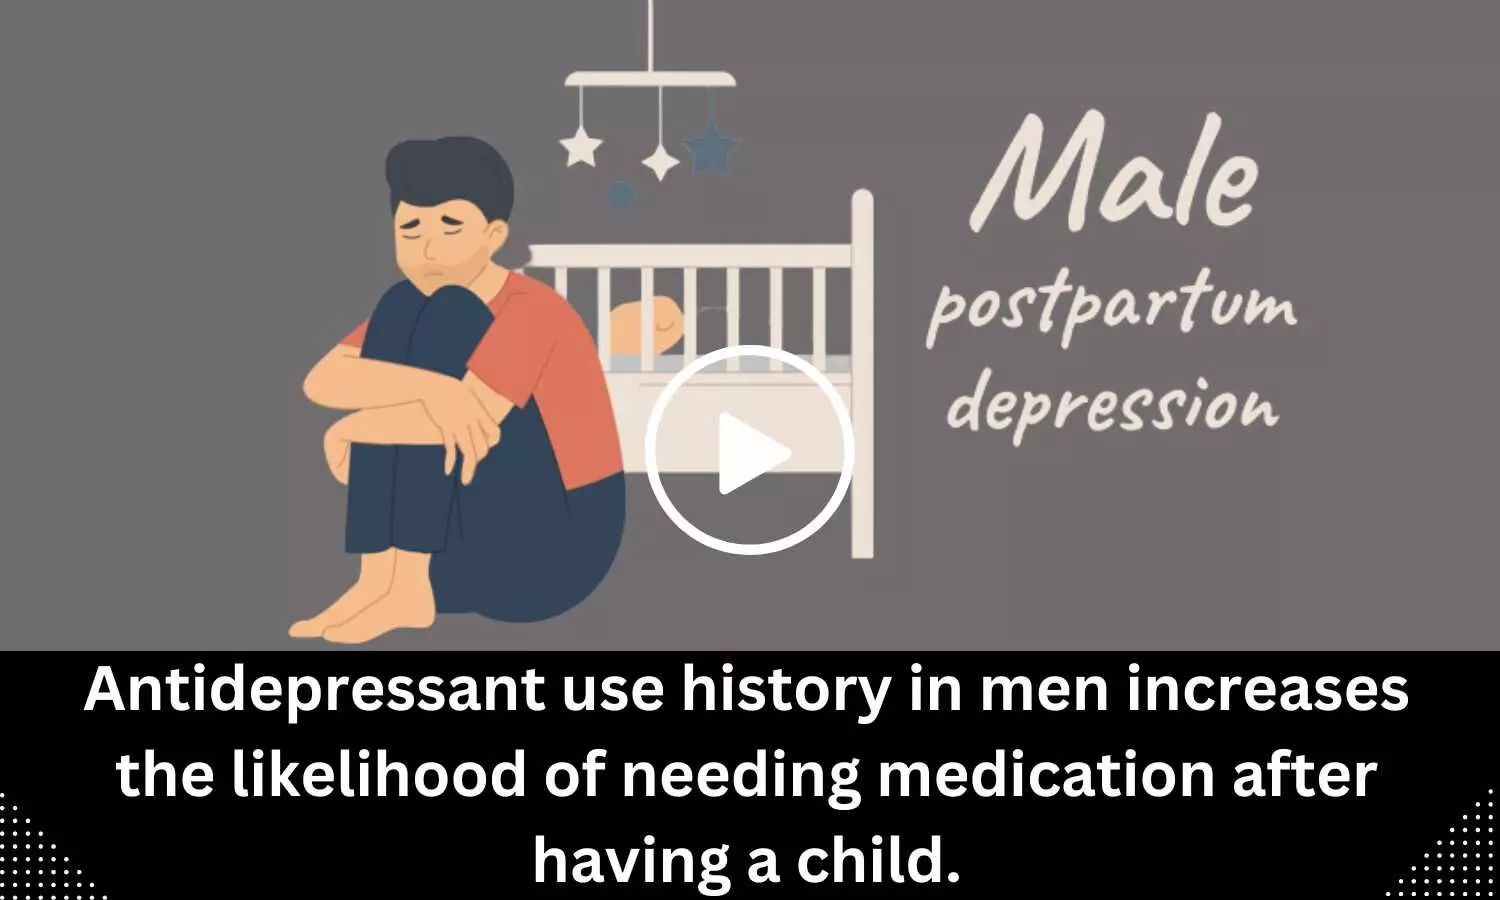 Antidepressant use history in men increases the likelihood of needing medication after having a child.